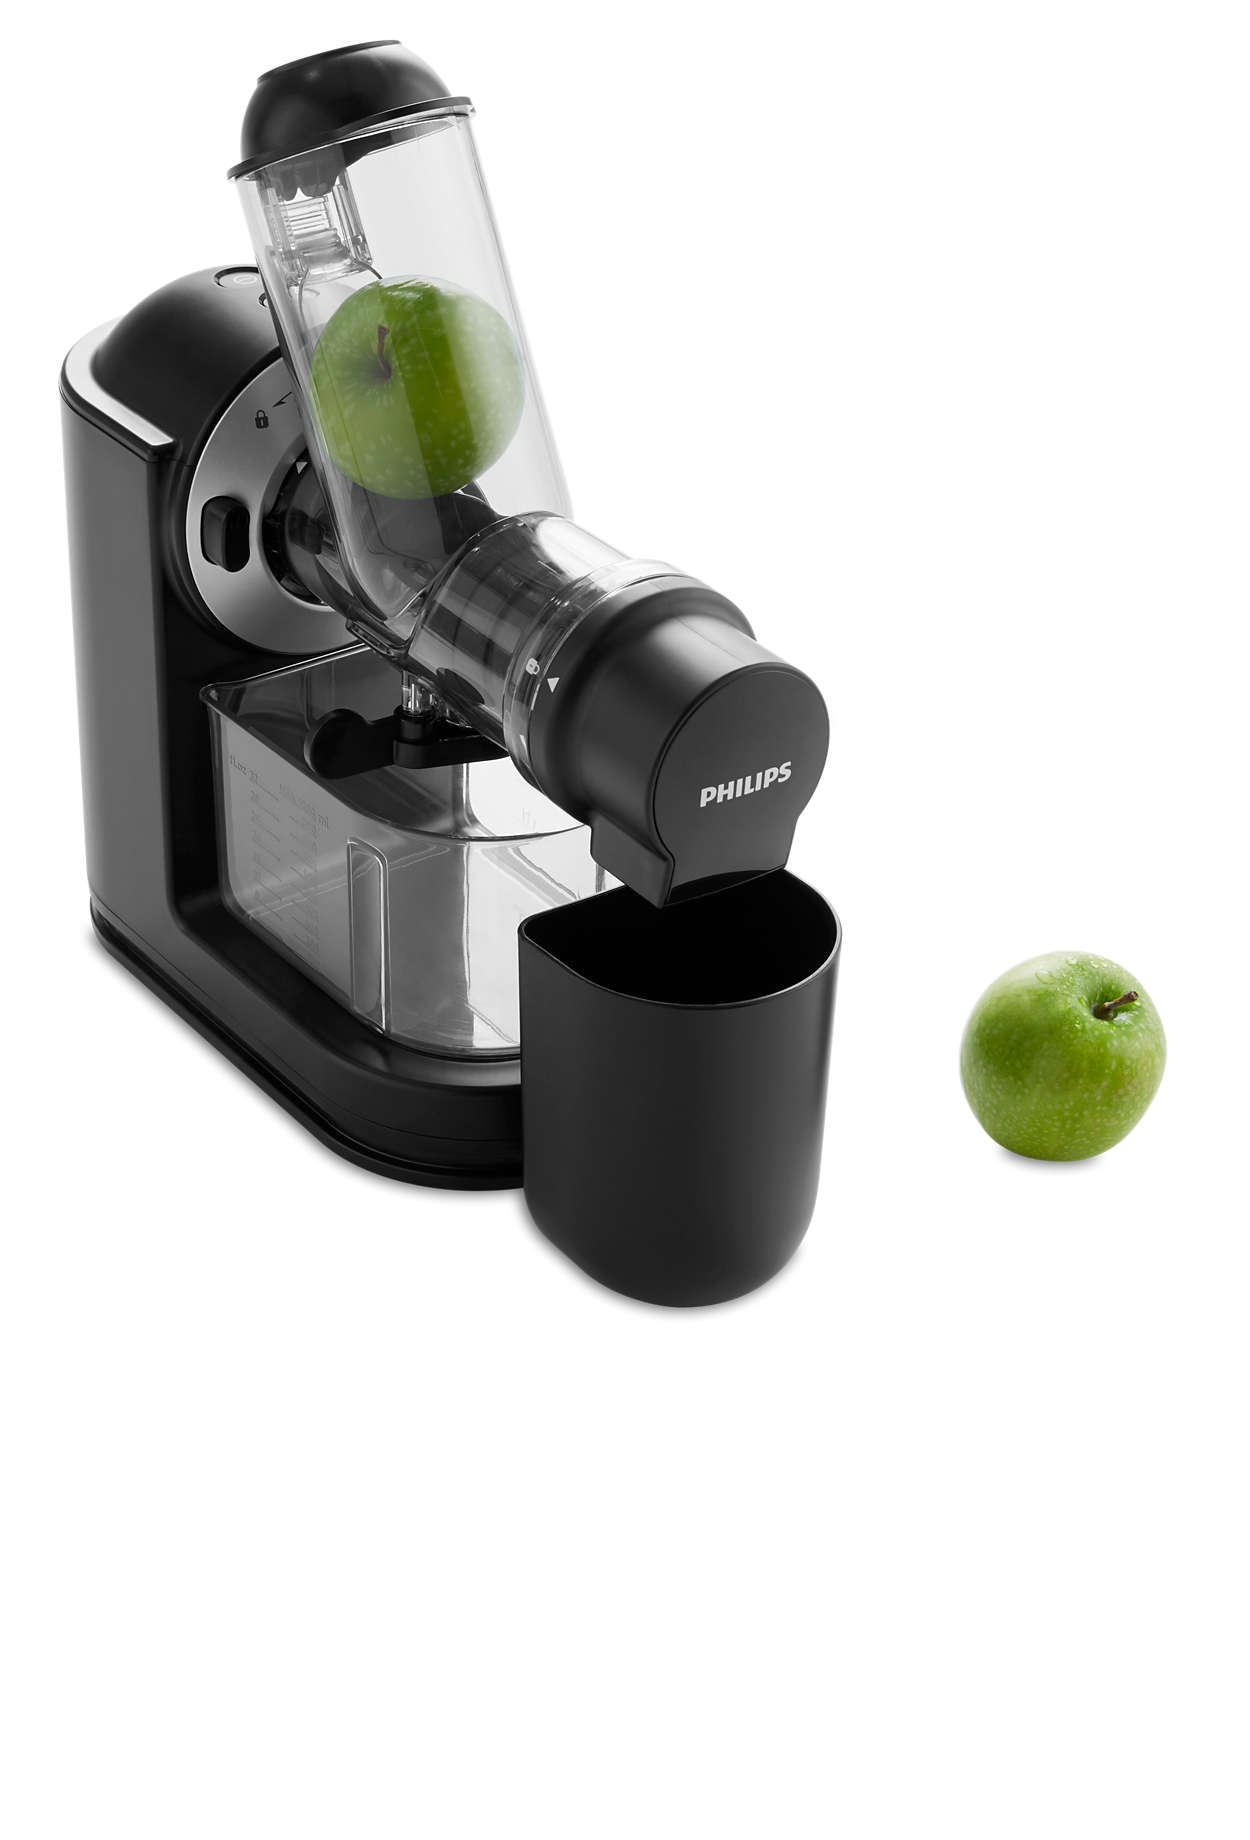 Viva Collection Slow Juicer HR1889/70 | Philips